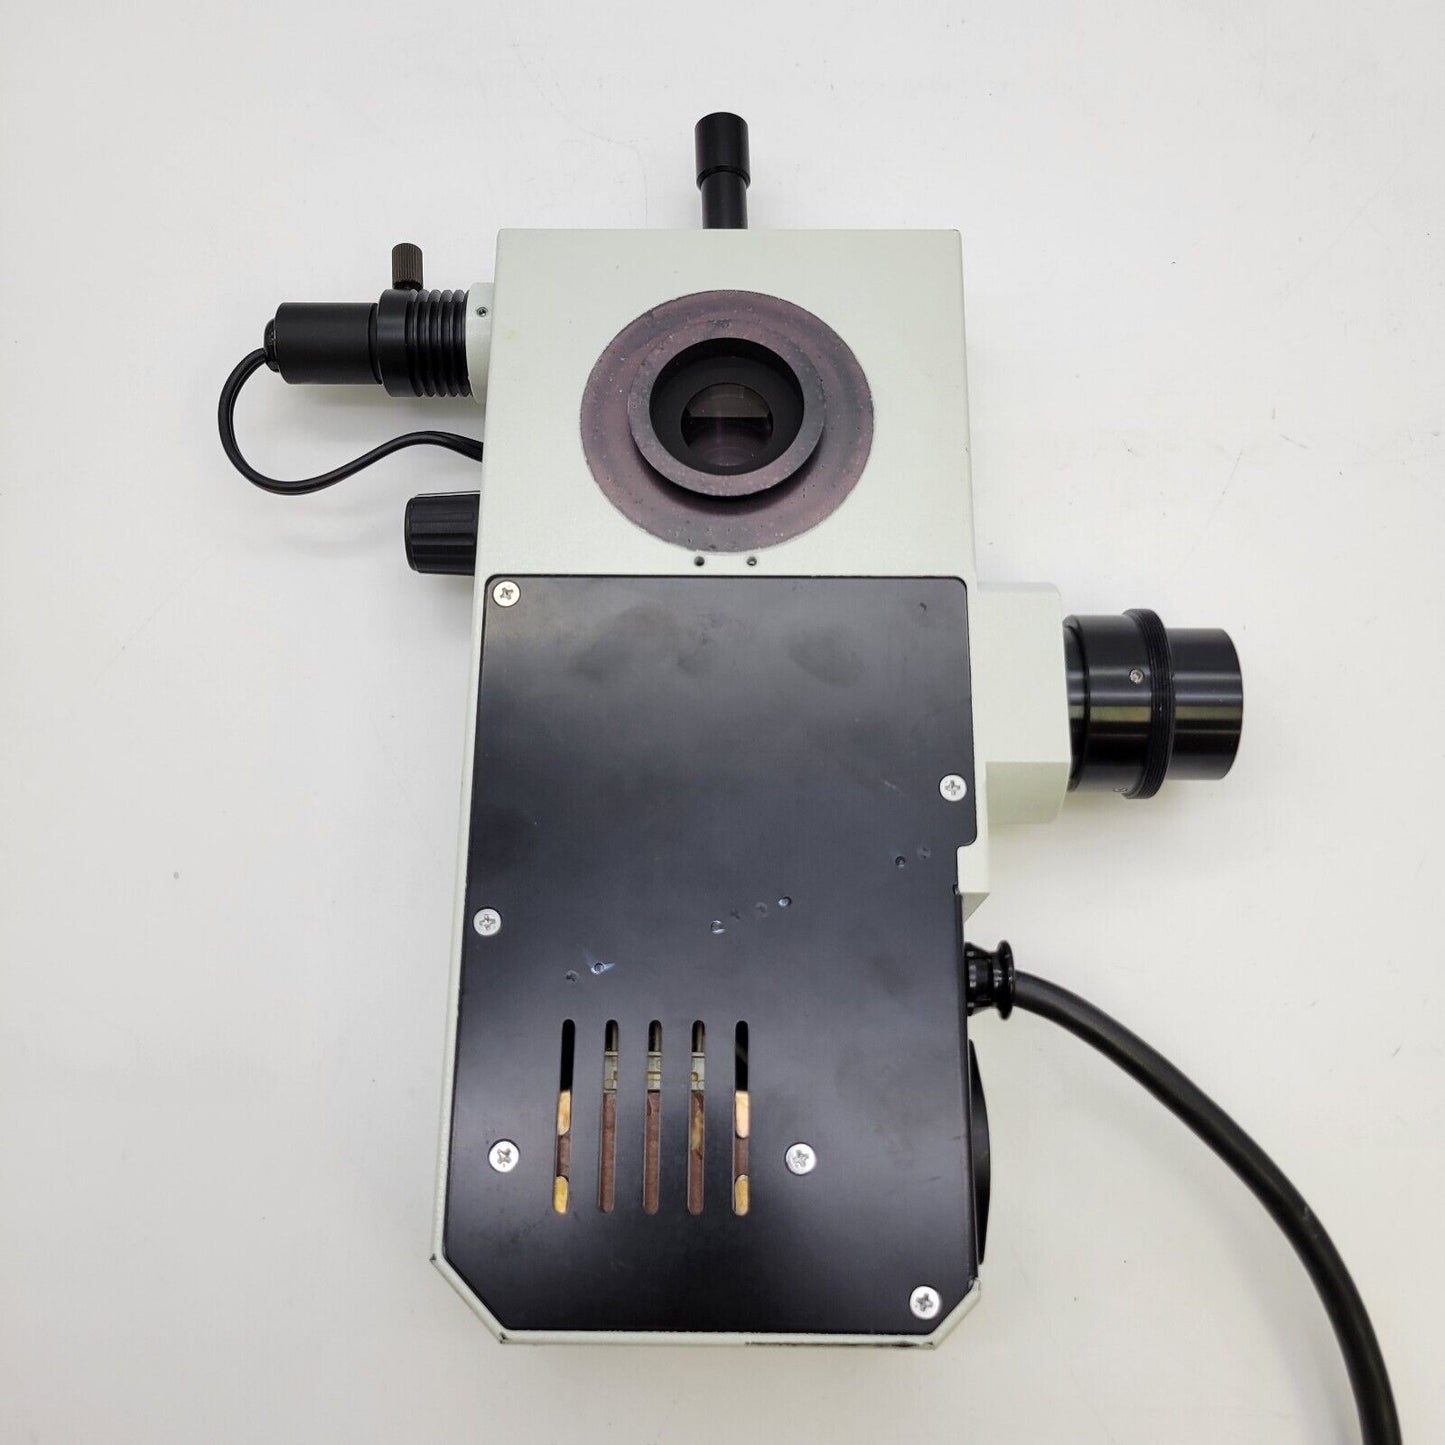 Olympus Microscope U-SDO Pointer with Side by Side Dual Observation Bridge - microscopemarketplace